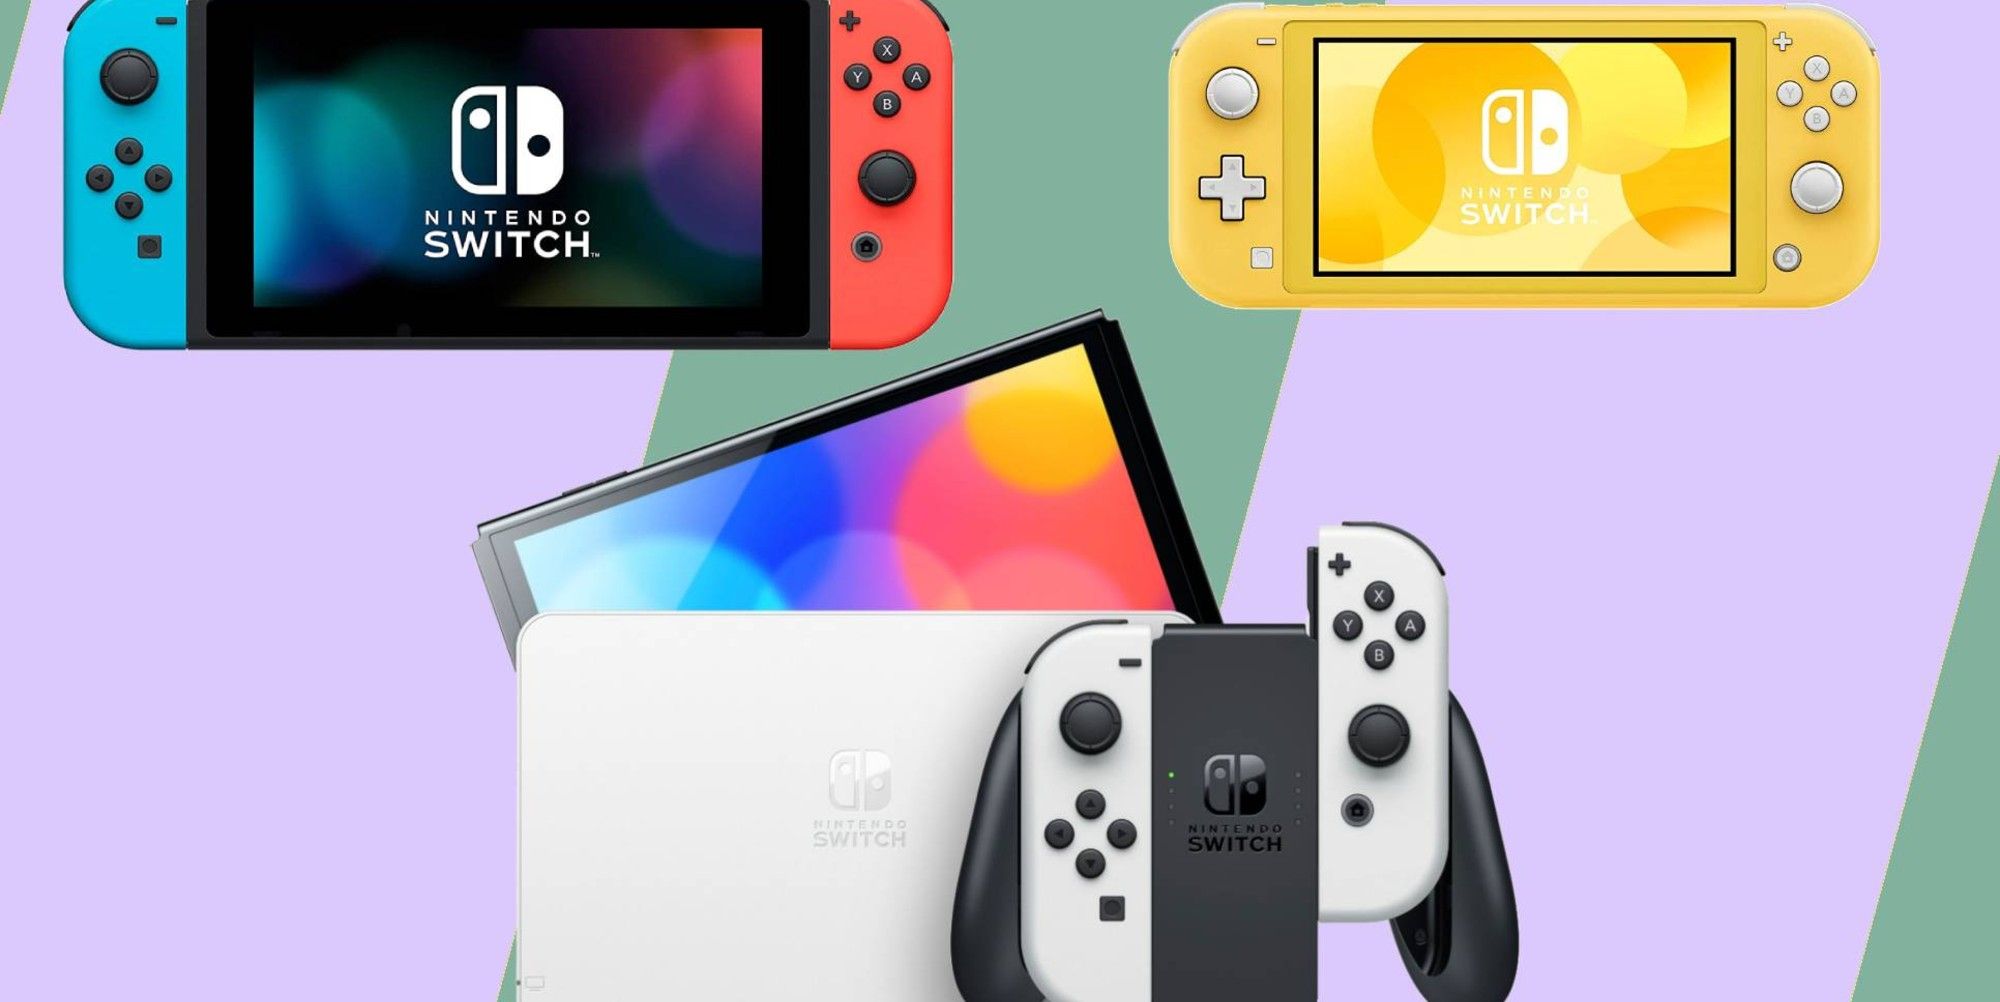 Nintendo Switch Could Be BestSelling Console By 2025